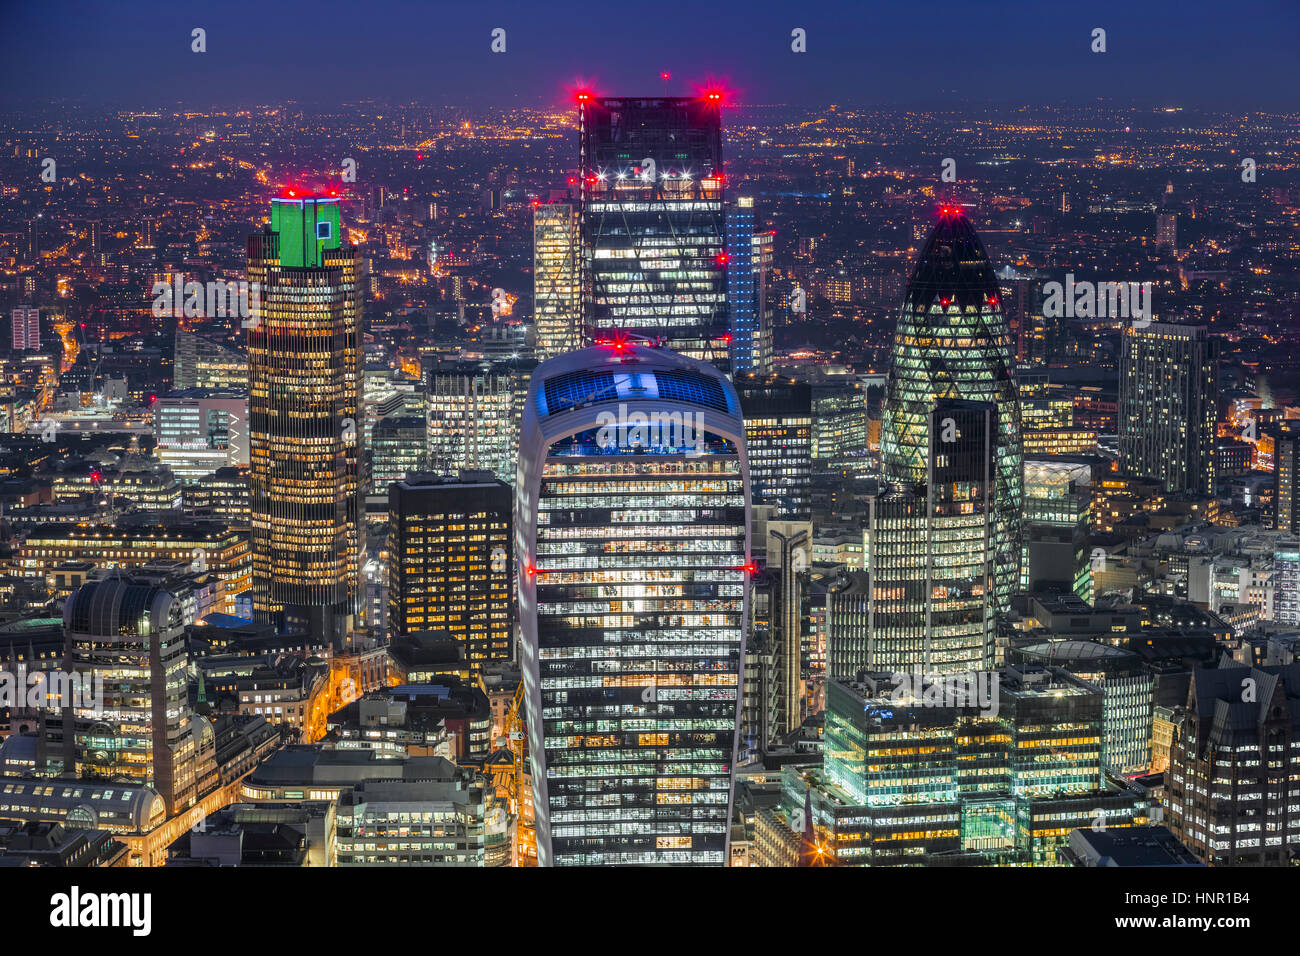 London, England - Aerial skyline view at of London's famous business district with skyscrapers and offices at night Stock Photo